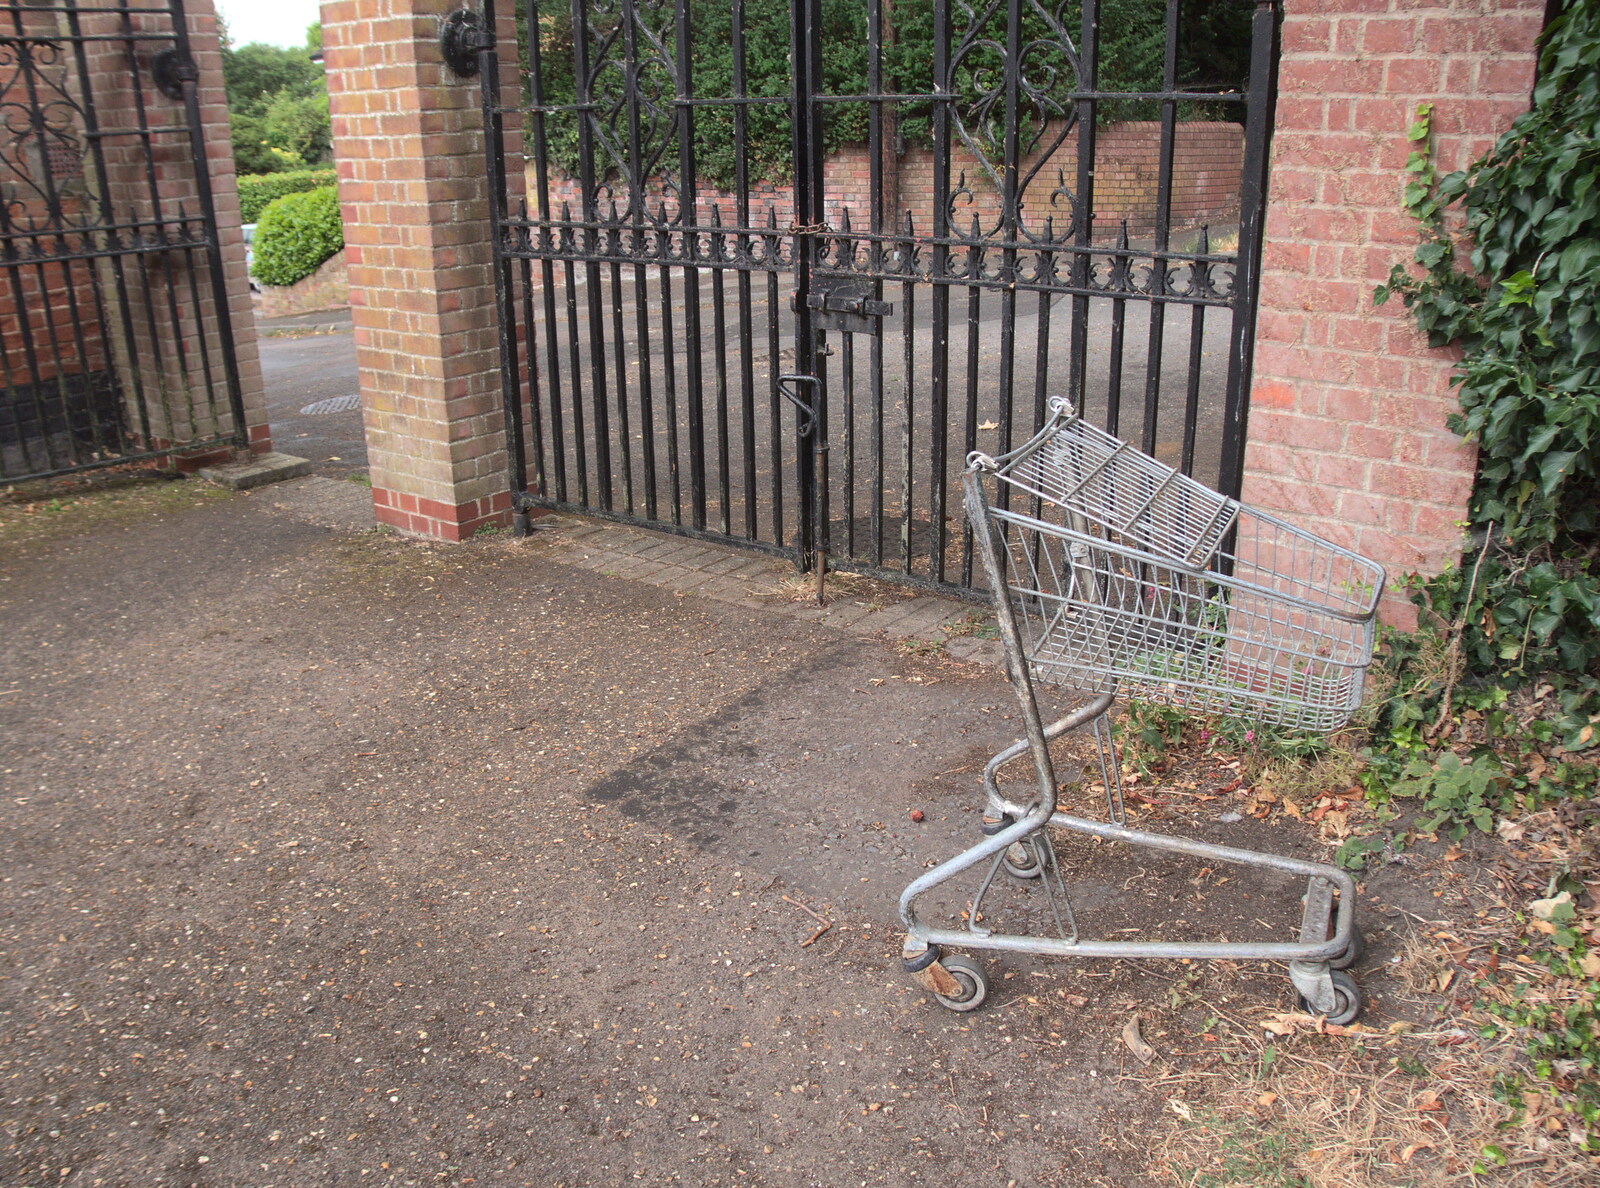 The Eye Piggy Tail Trail and Ipswich Dereliction, Suffolk - 29th July 2022: It's a classic: an abandoned shopping trolley